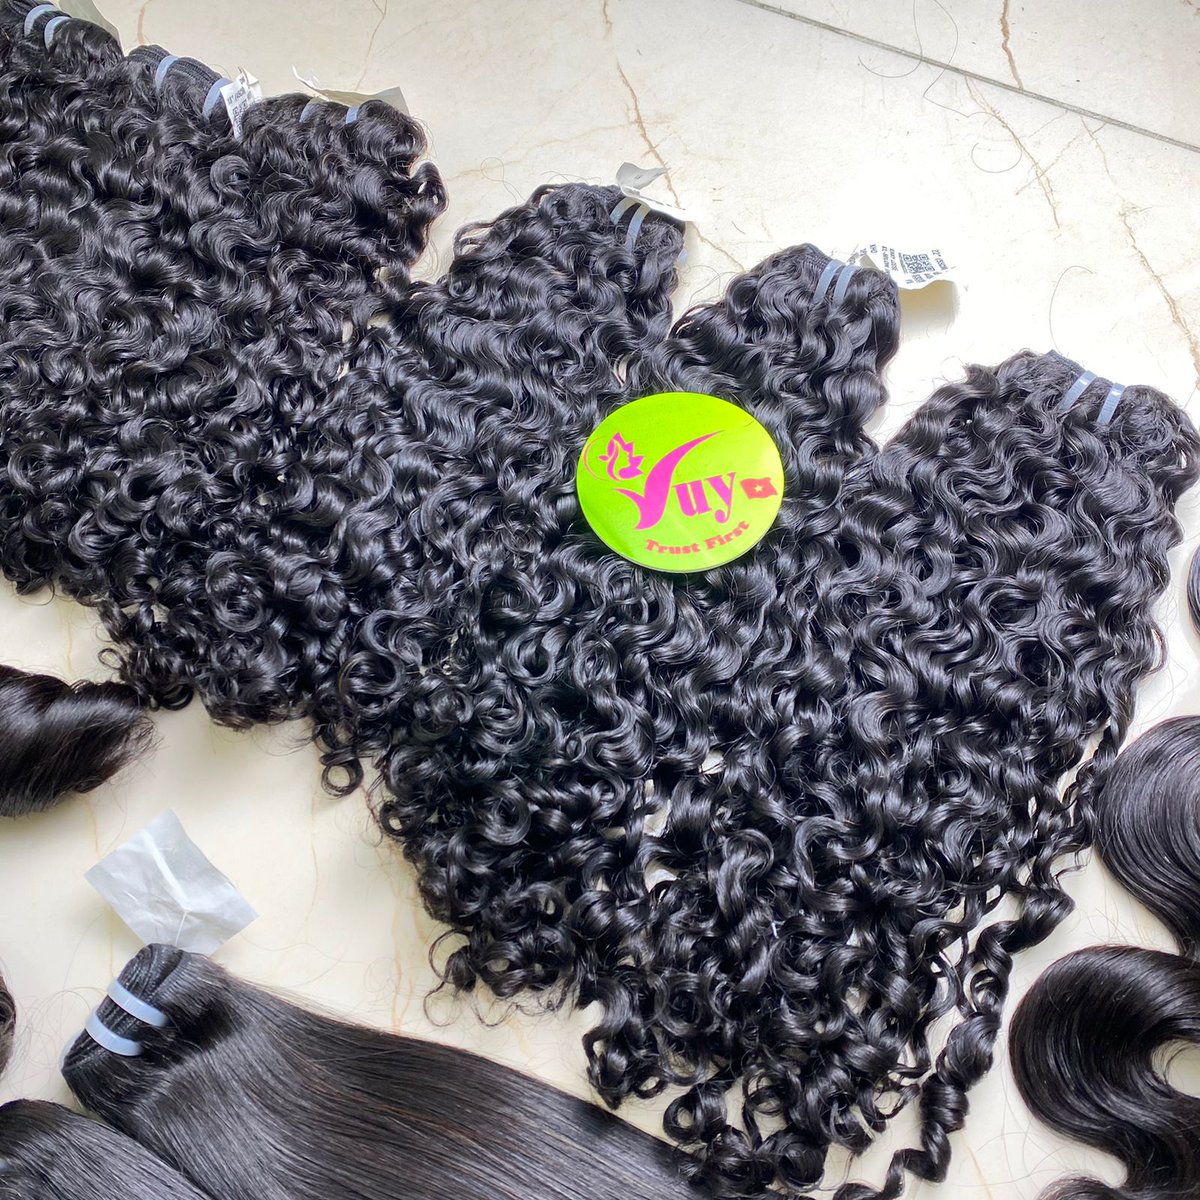 Sun Curly With Raw Hair From VUY VietNam 🥰Contact With Me On Whatsapp +84396092128 #RawHairExtensions #NaturalHairExtensions #RawVirginHair #UnprocessedHair #RawHairVendor #HairExtensions #HairWeaves #RawIndianHair #VirginHairExtensions #RealHairExtensions #RawHairBundle